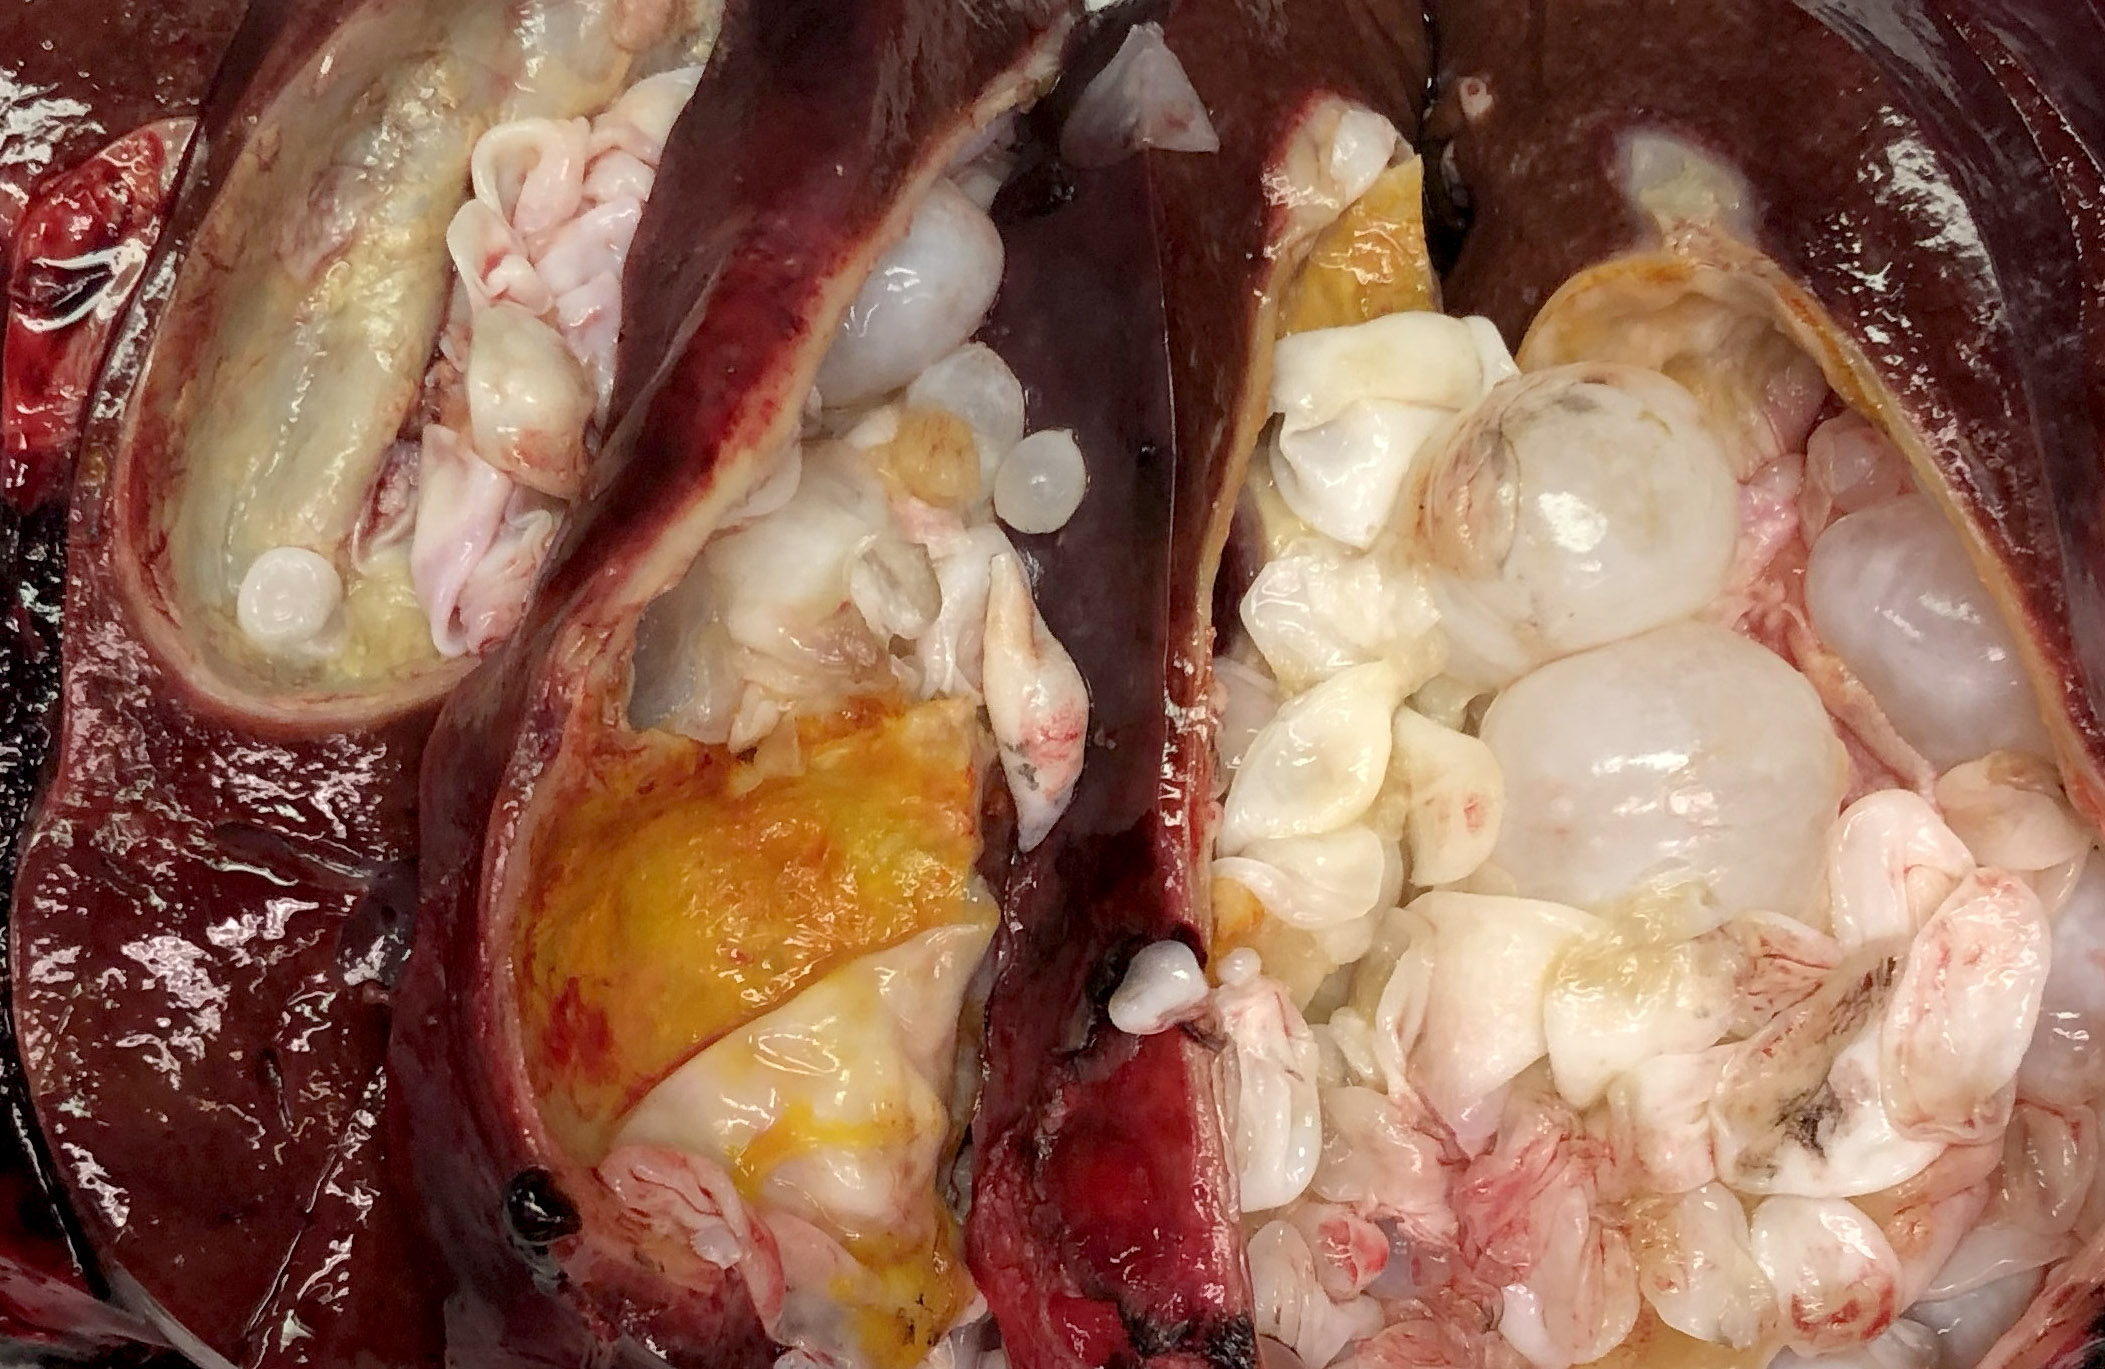 Gross section of hydatid cyst